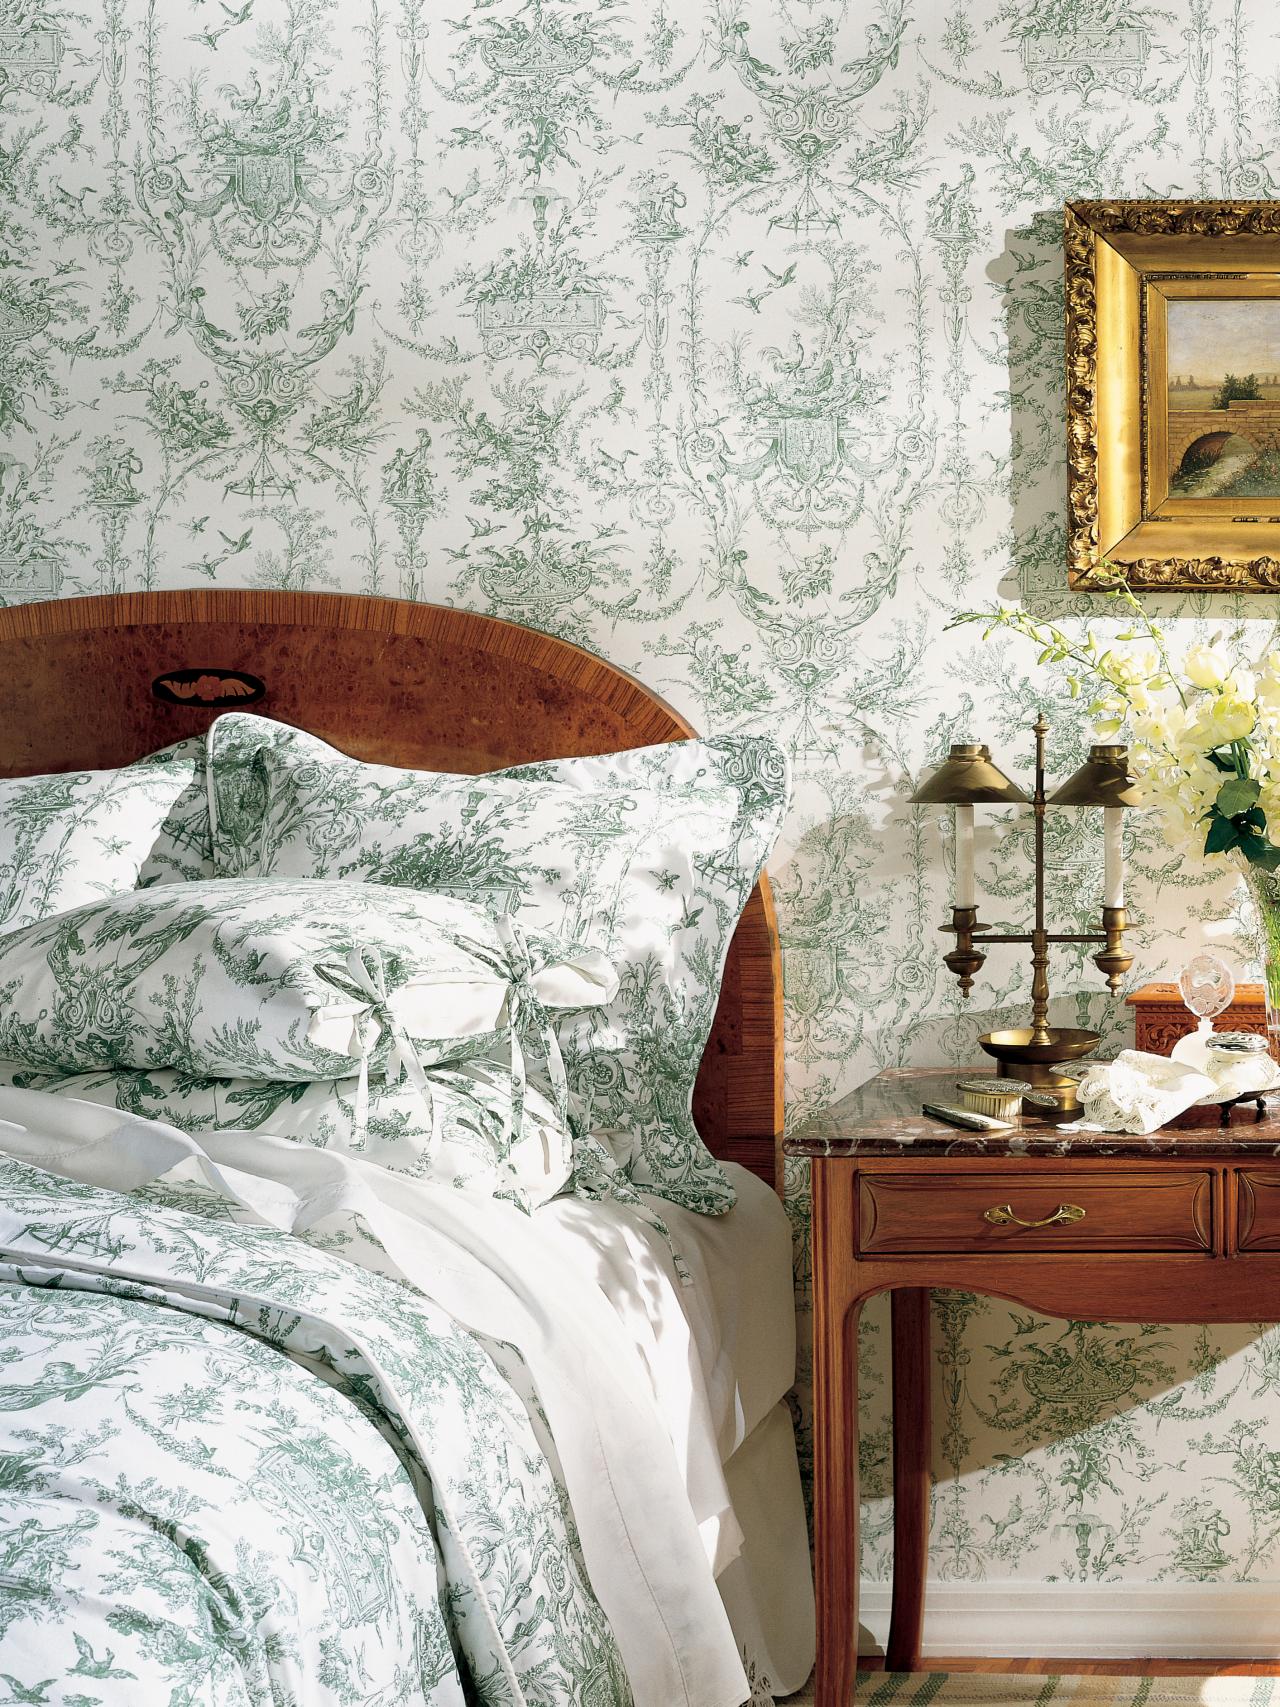 Free Download Country Bedroom With Green And White Toile